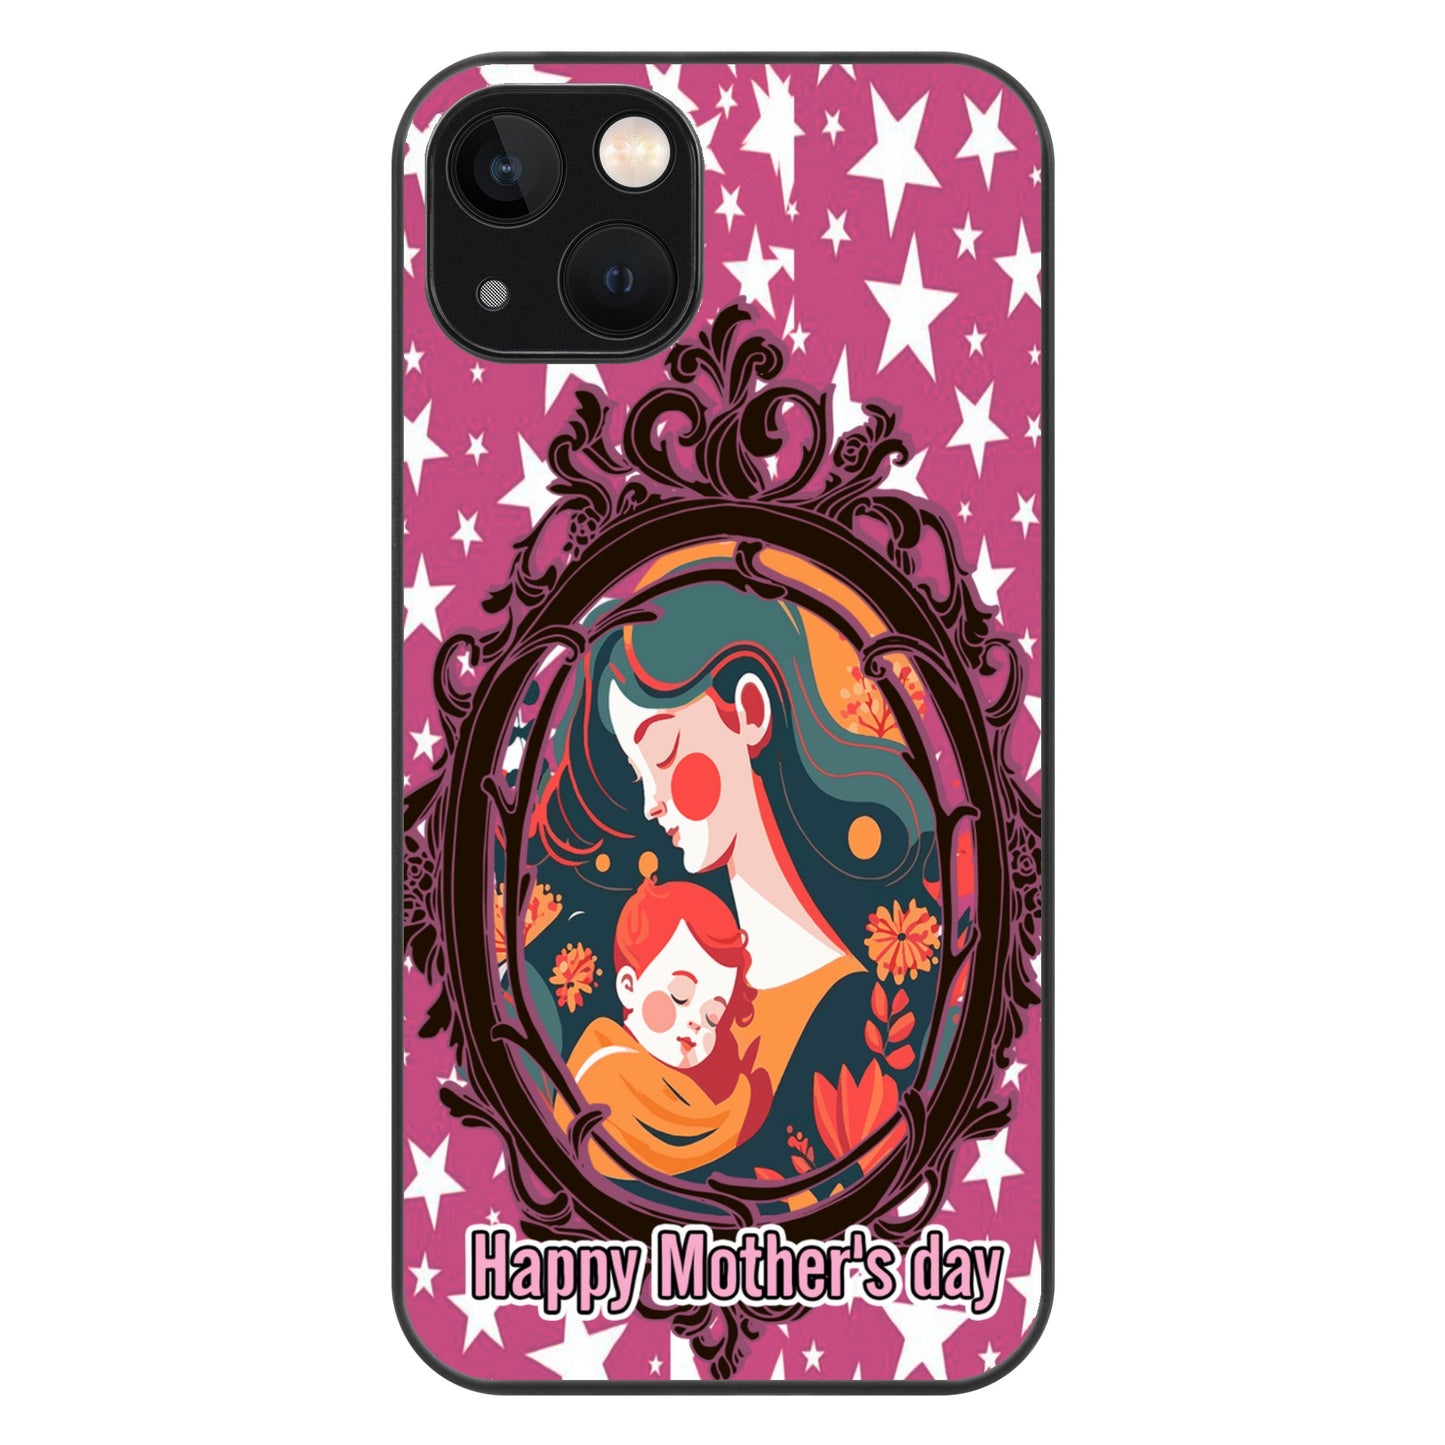 iPhone13 Series Phone Cases Great for Mothers Day Show Her How Much You Love Her